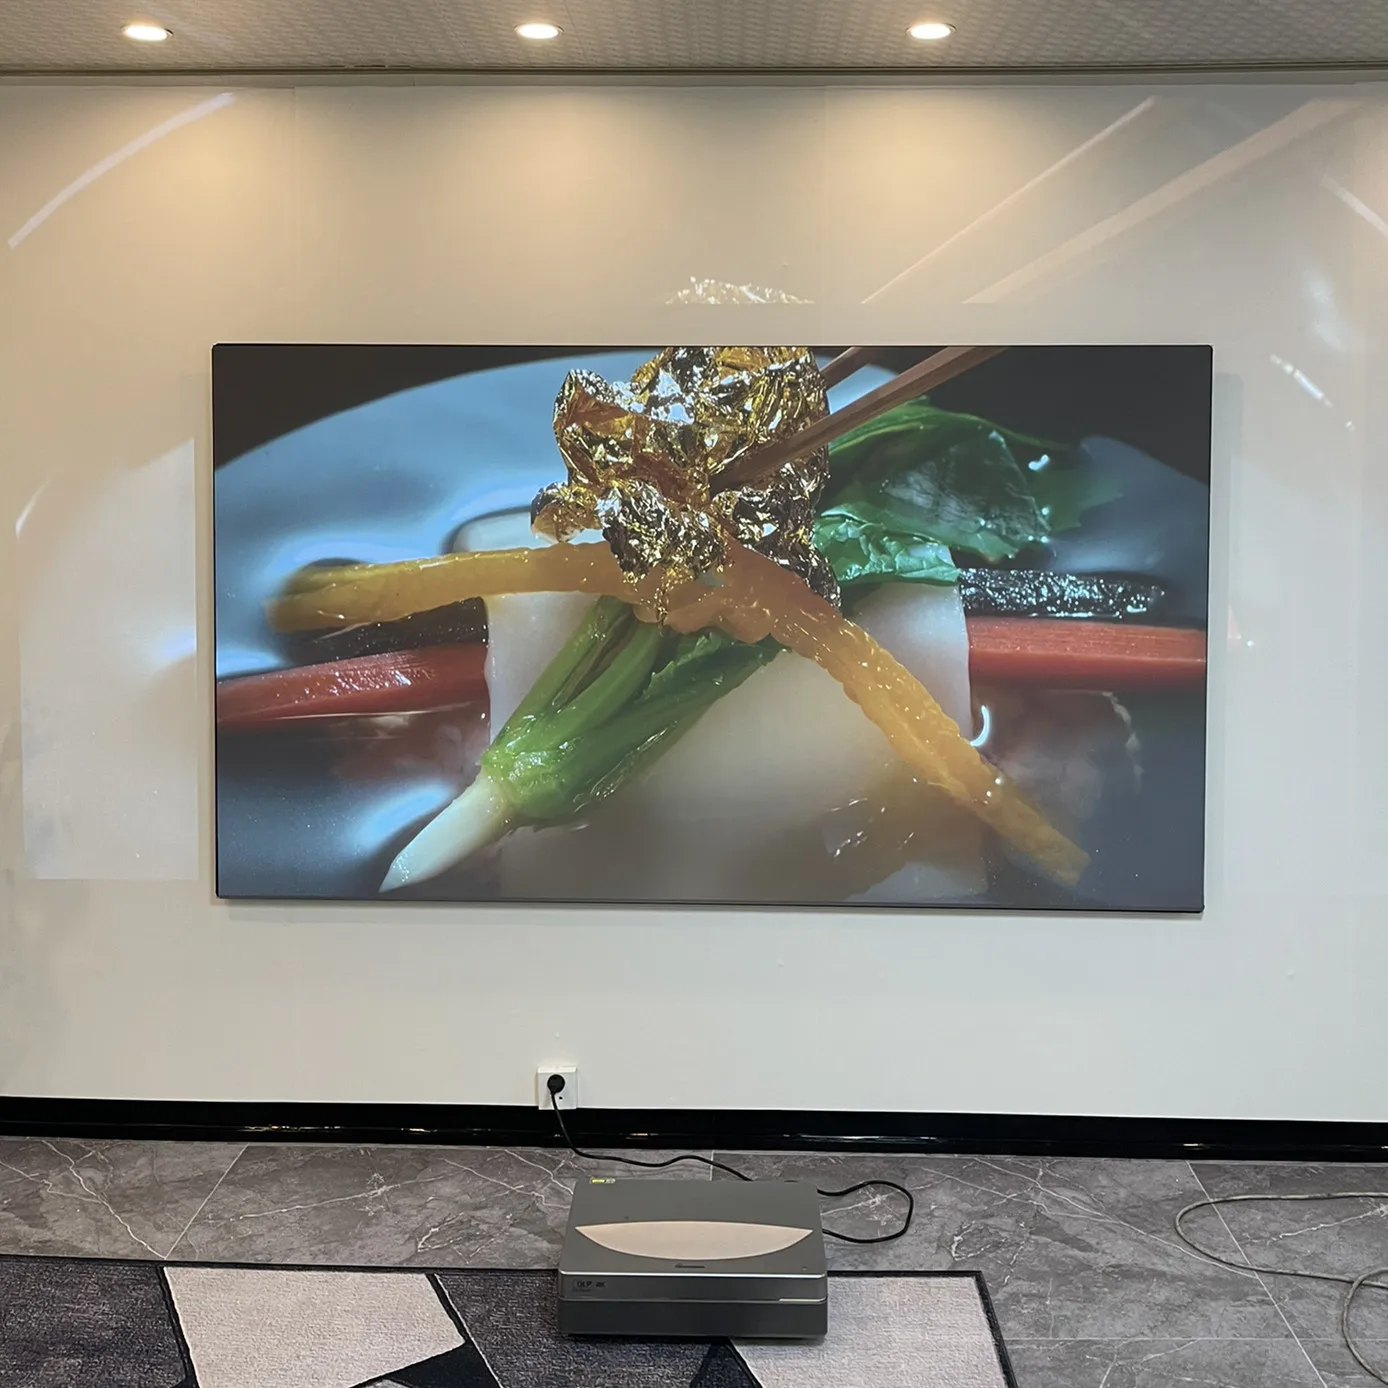 100-120 Inch Fresnel Anti-Light Giant Projection Screen with 0.5mm Flexible Diaphragm Roll Up to Go For UST Projector Laser TV